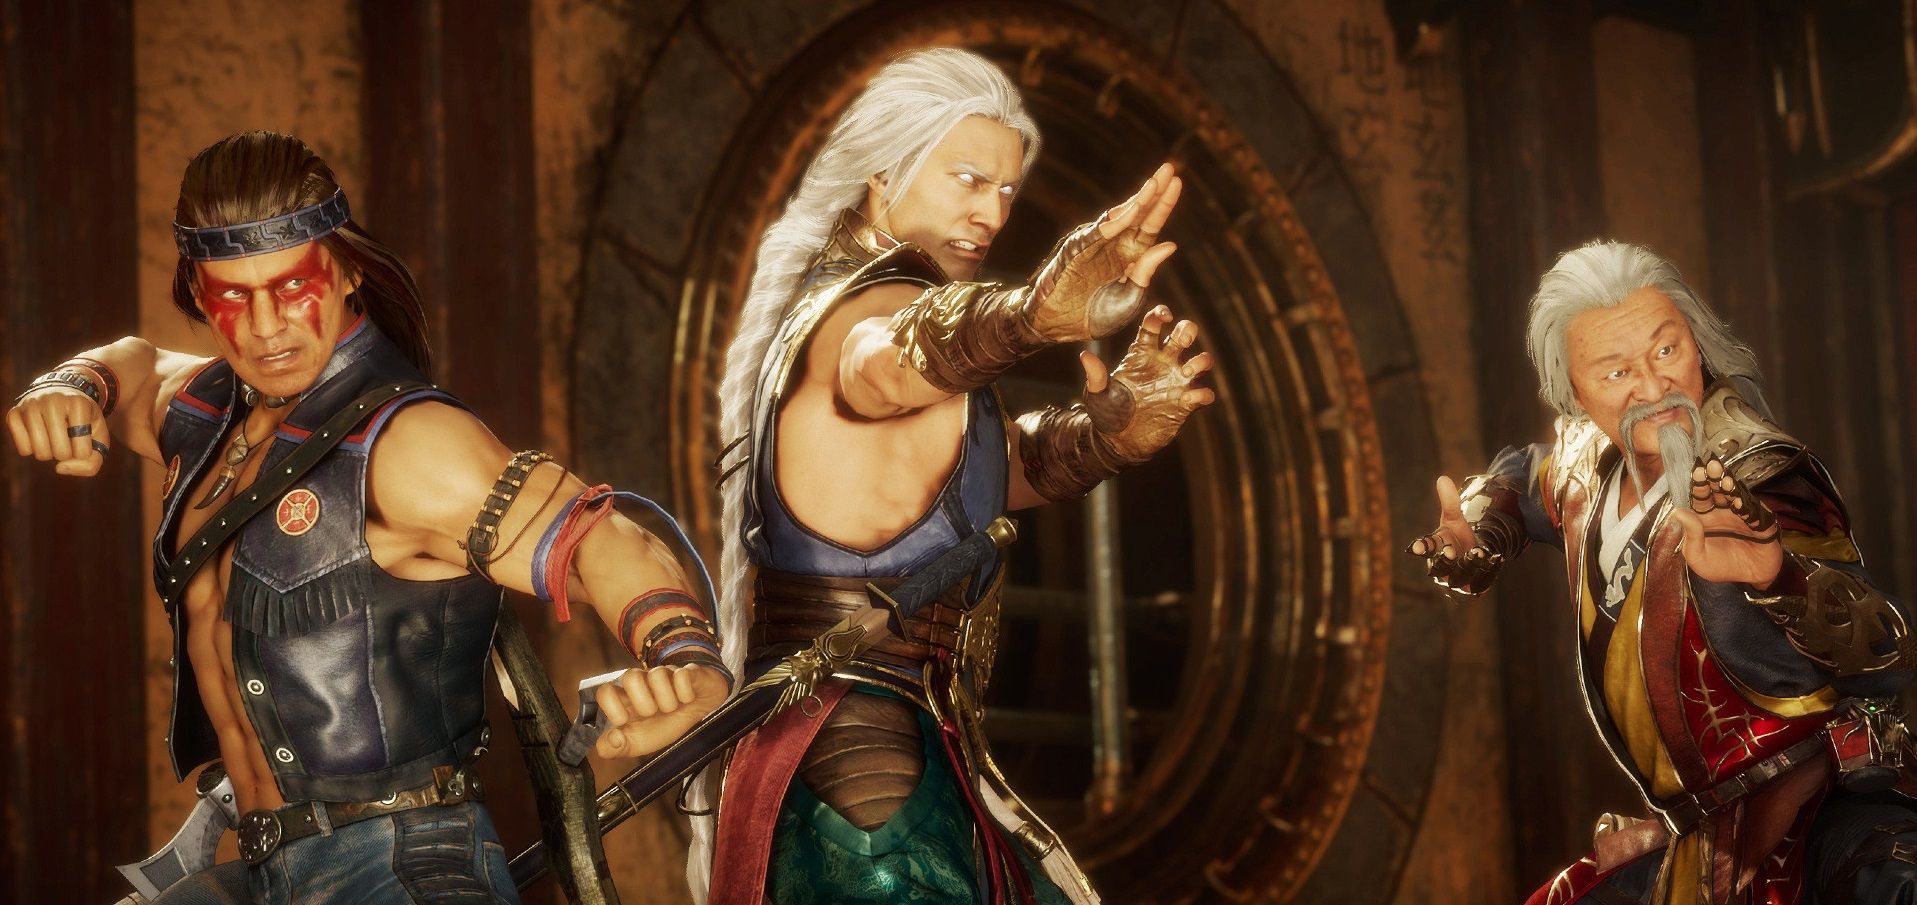 Mortal Kombat 11: Aftermath has an outstanding story campaign. PC